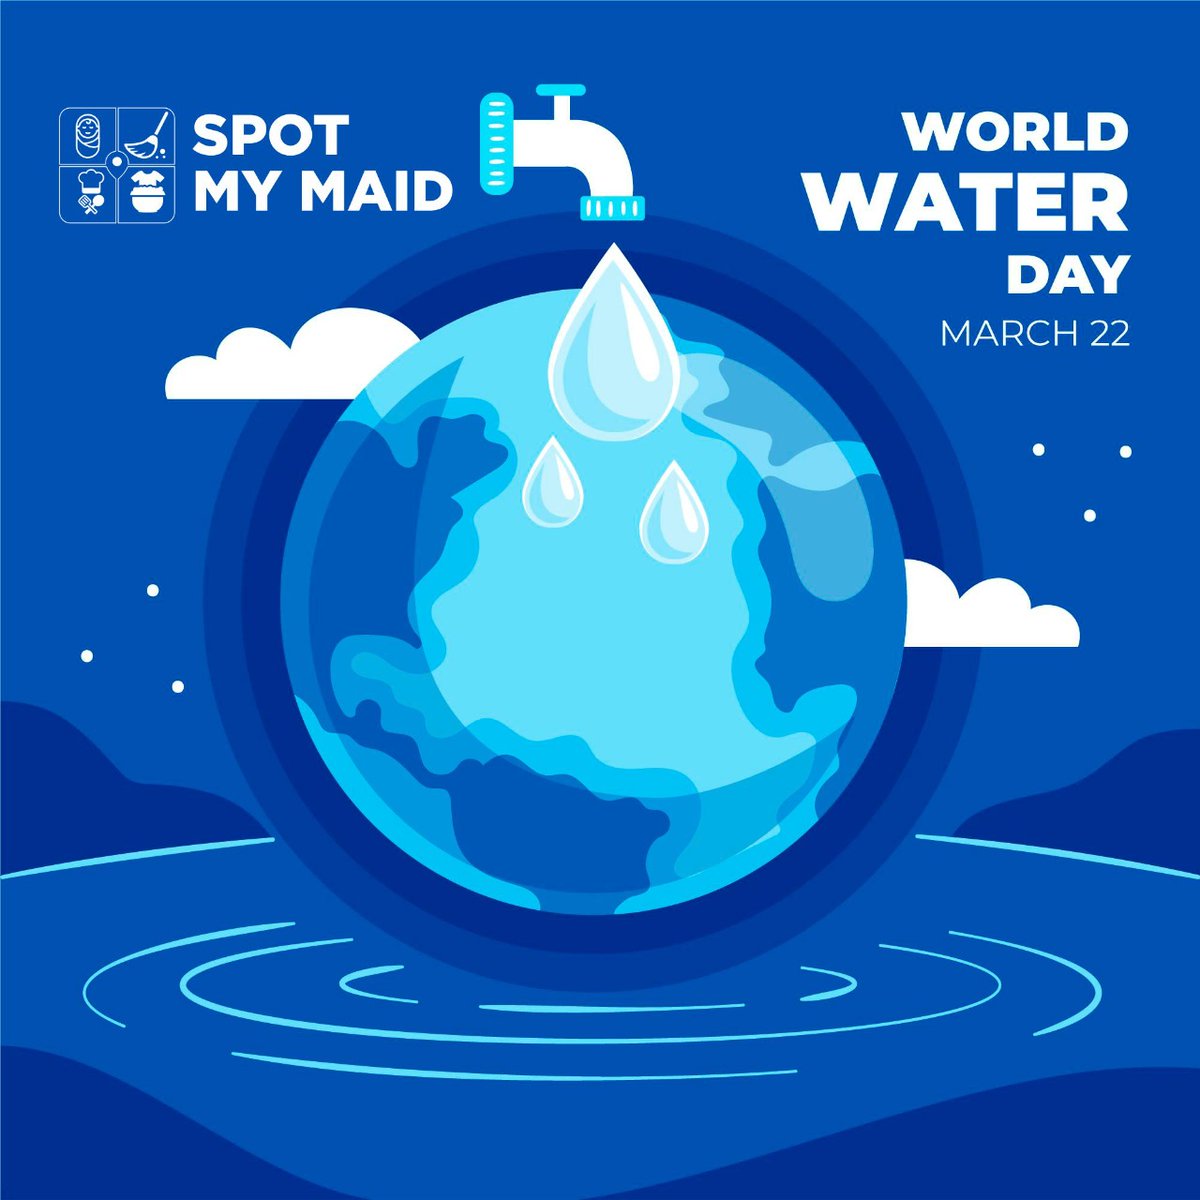 HAPPY WORLD WATER DAY TO ALL DEAR FRIENDS:

'World Water Day is not to be congratulated, but Water in the World must be saved! Let's save Water!'

#worldwaterday #water #all #savewater #wwdphc #cleanwater #waterday #climatechange #health #leavingnoonebehind #environment